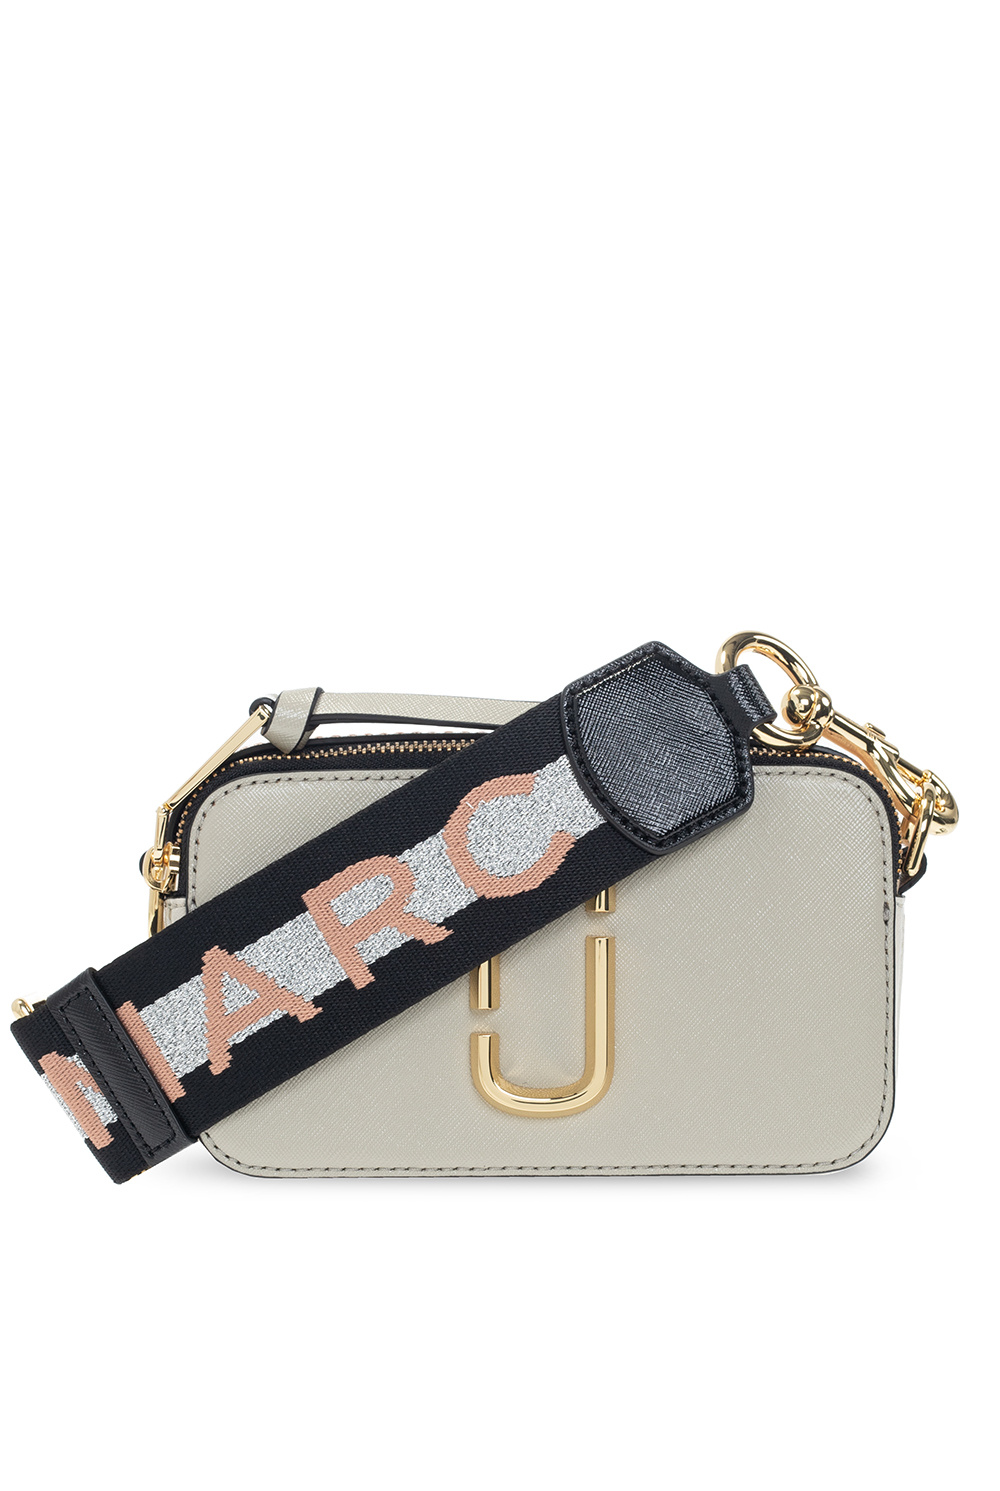 The Marc Jacobs Snapshot shoulder bag Small Camera Bag in taupe